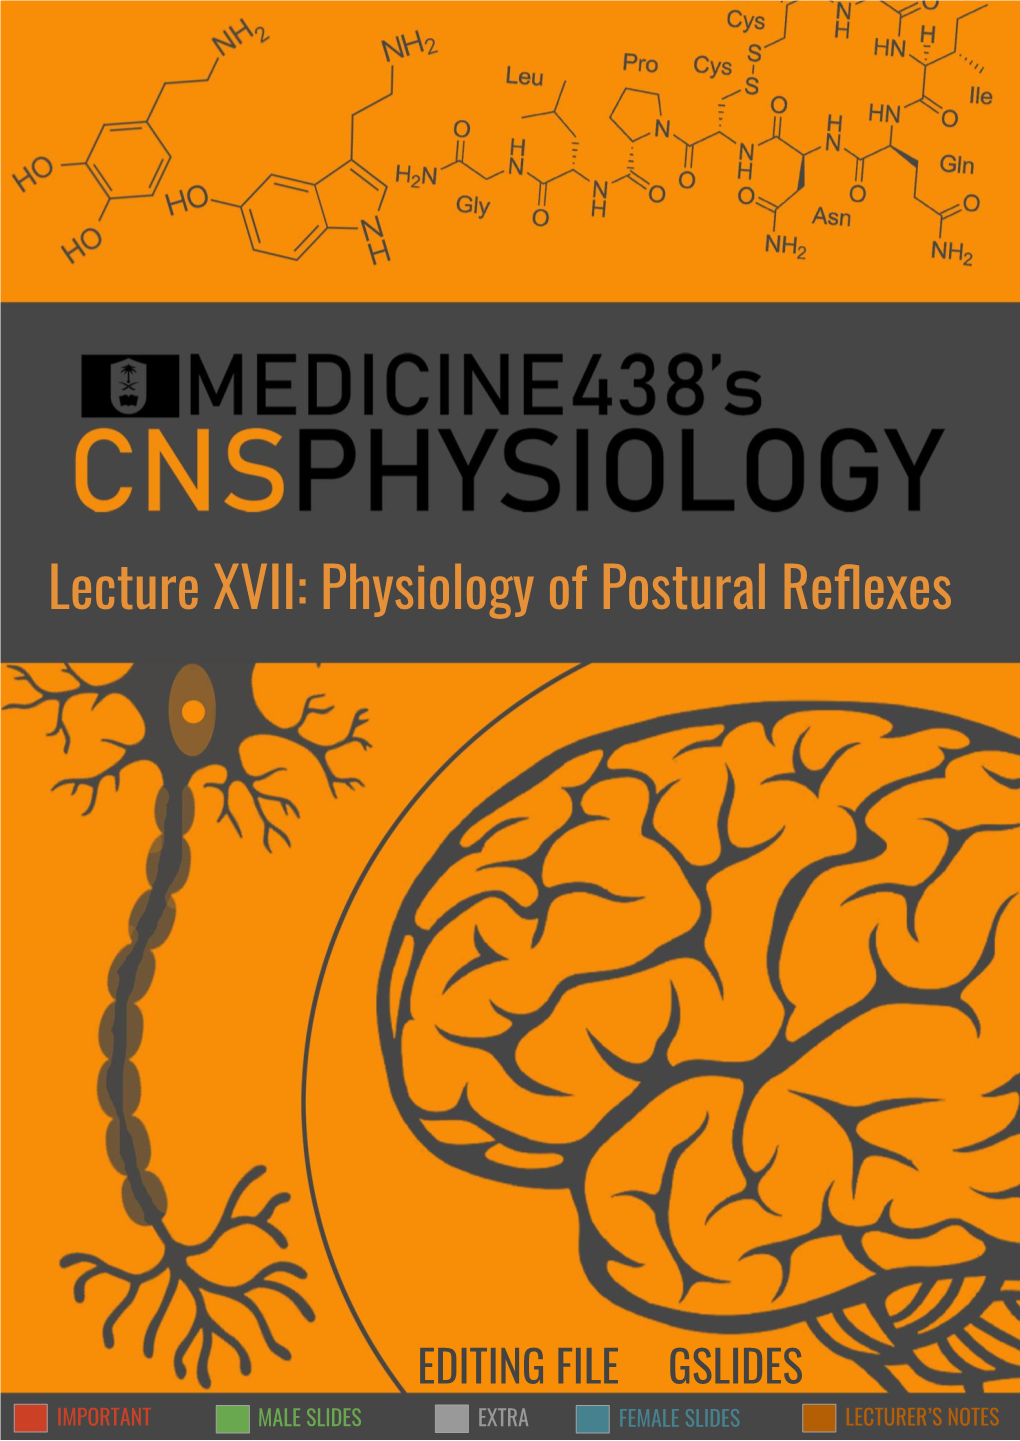 Lecture XVII: Physiology of Postural Reflexes